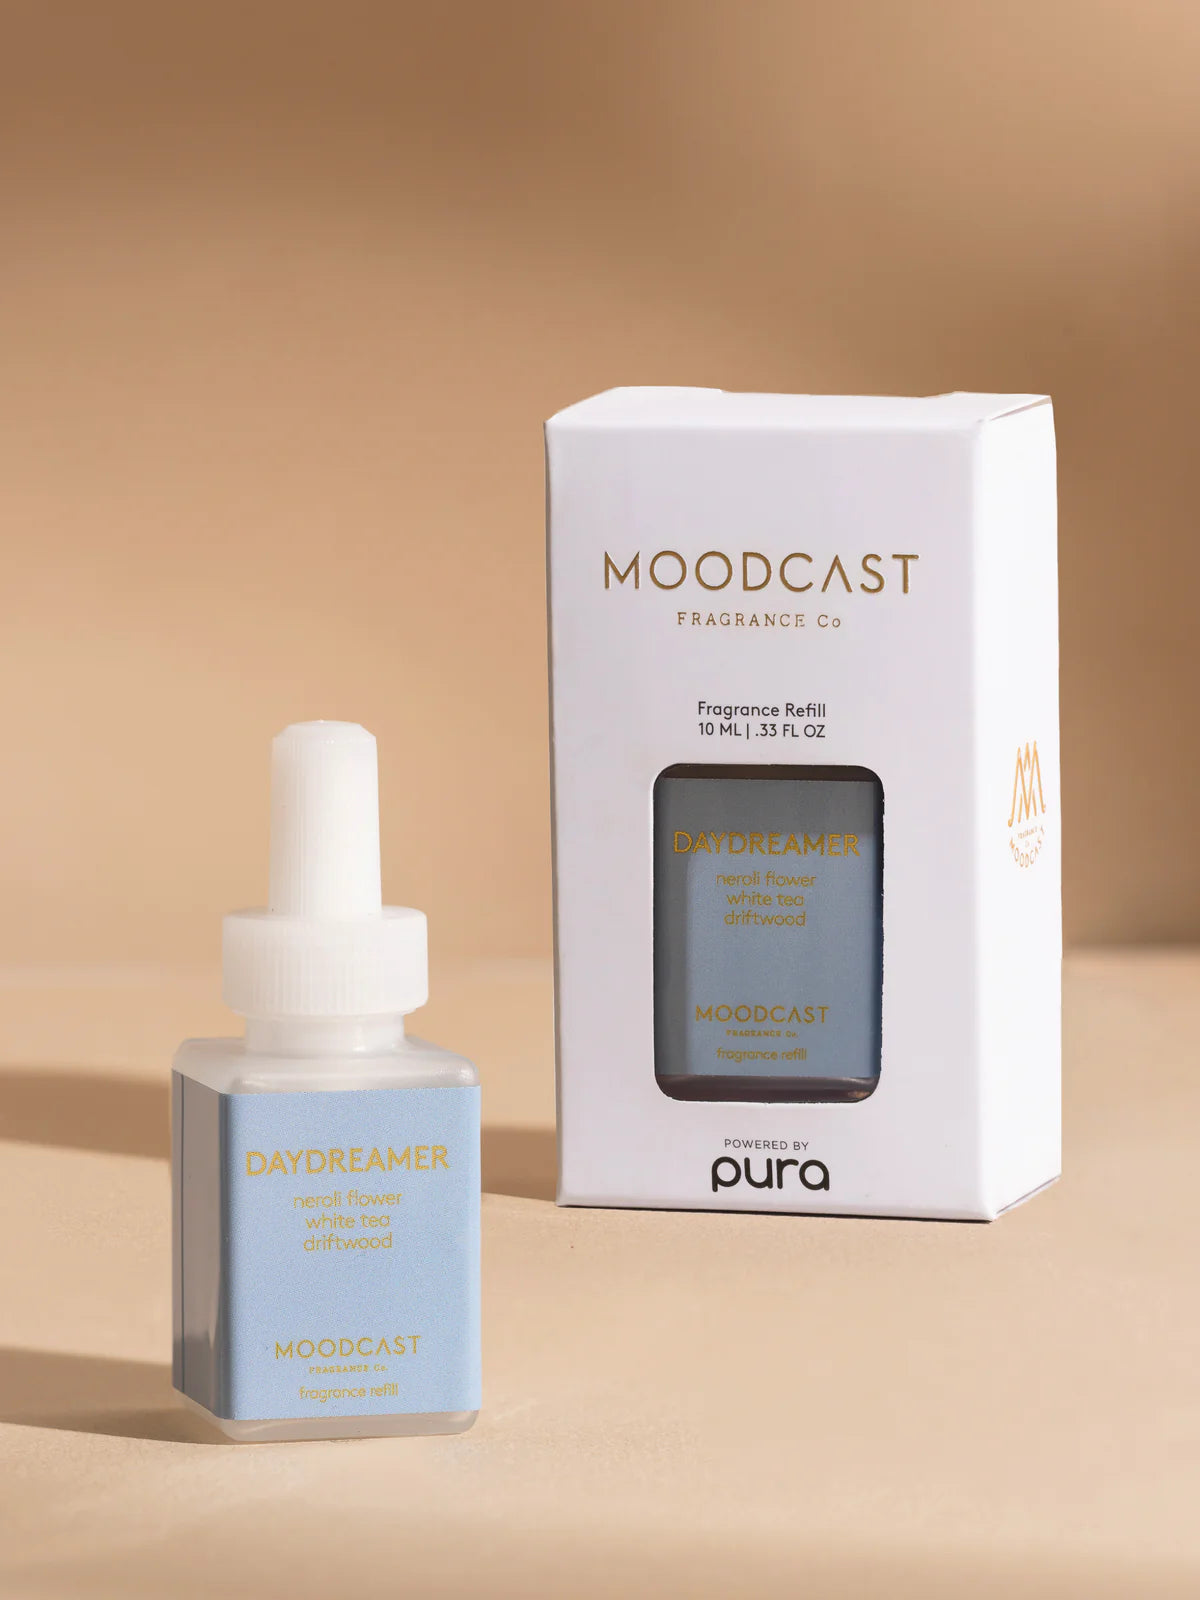 Pura - Daydreamer Moodcast Replacement Fragrance